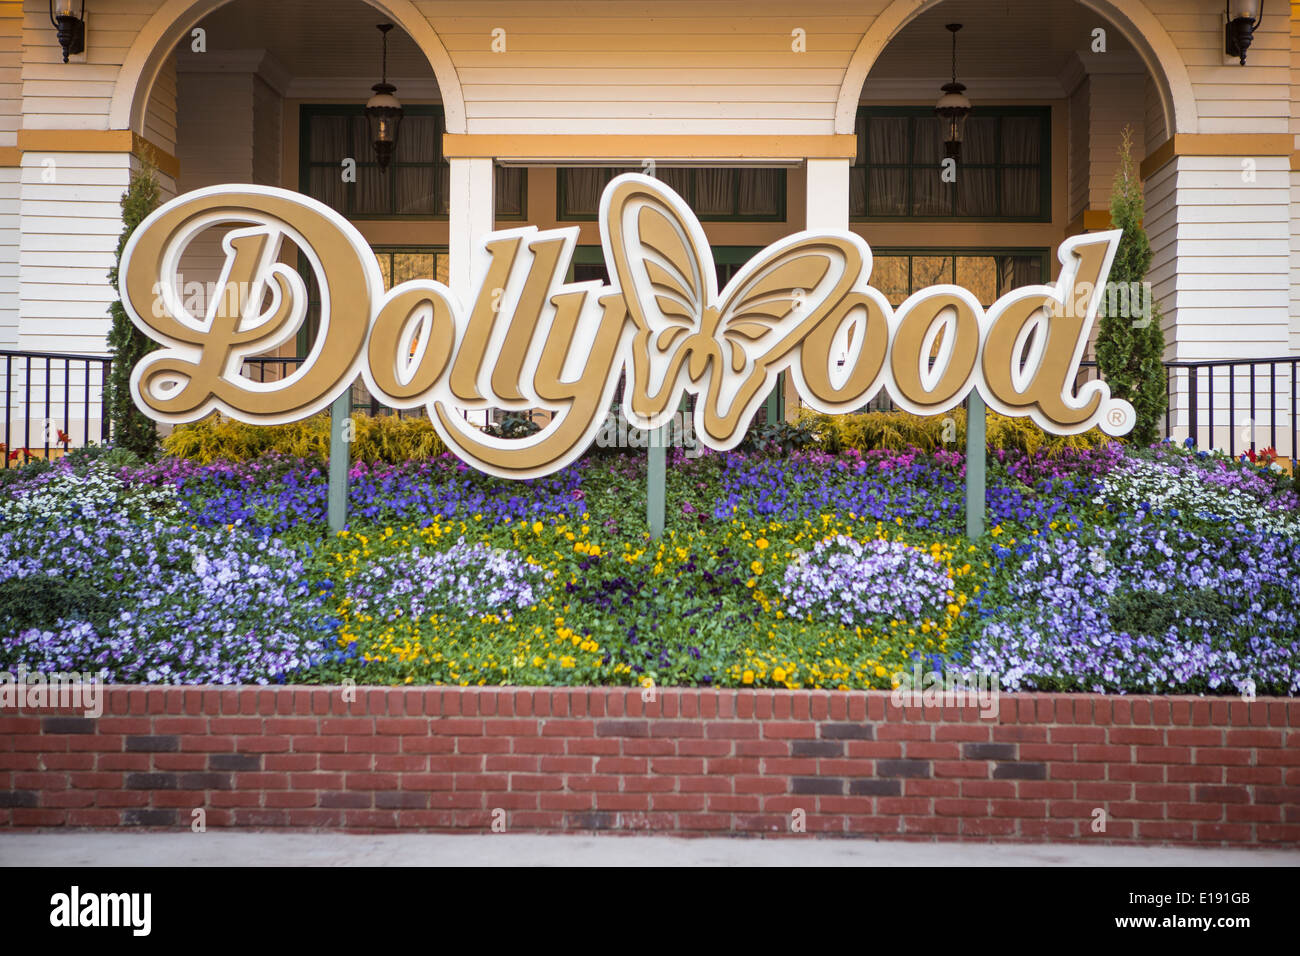 Showstreet Palace Theater ist im Themenpark Dollywood in Pigeon Forge, Tennessee abgebildet. Stockfoto